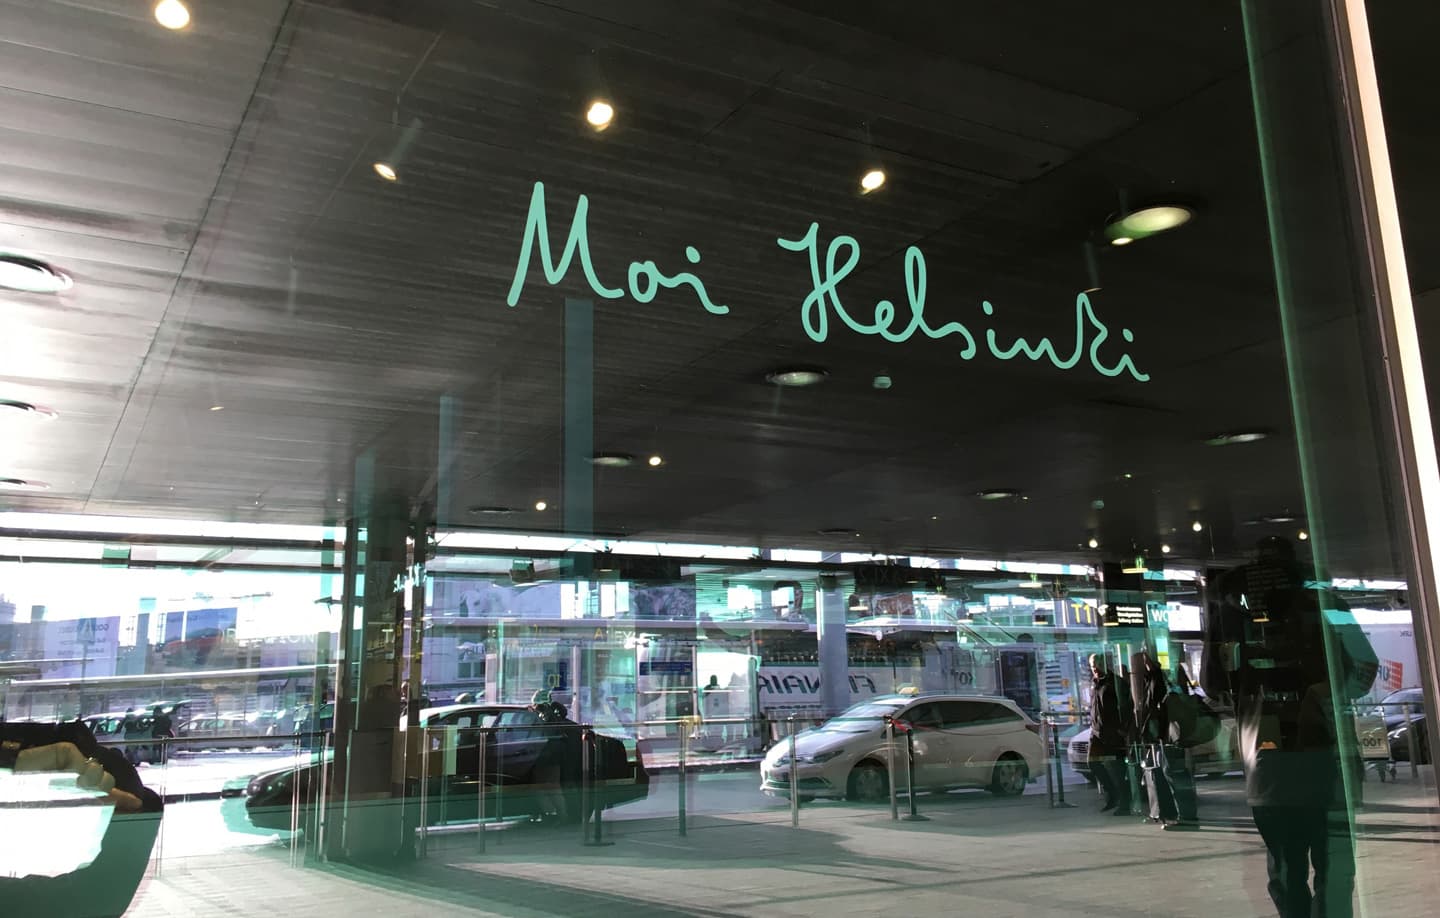 Signage outside of the building of Helsinki airport